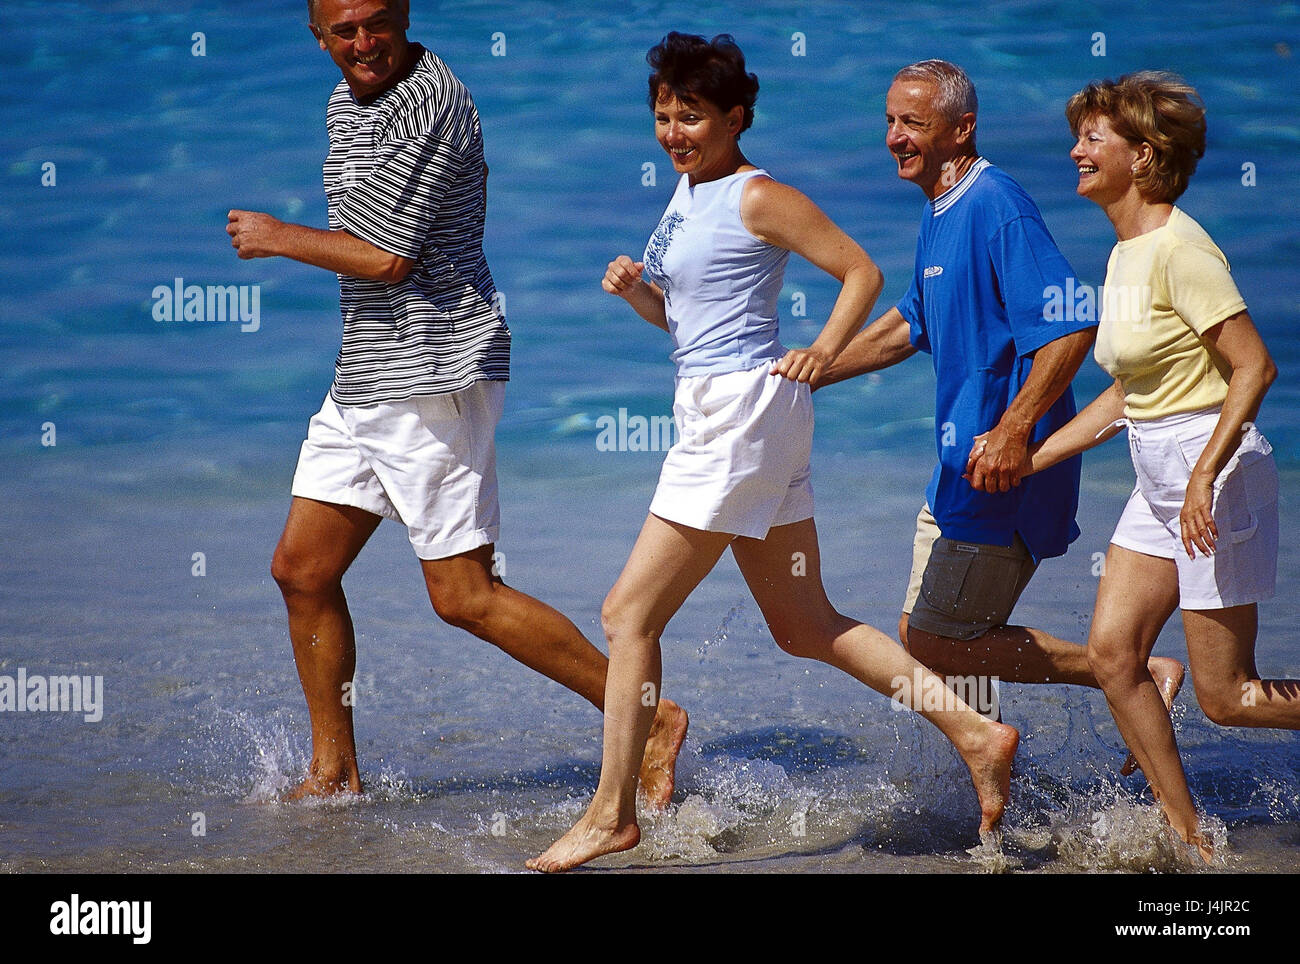 Couples, middle old person, beach run outside, summer, vacation, leisure time, lifestyle, four, friends, together, fun, happily, tuning, positively, sport, sportily, beach, sea, run, jog, jogging, fit fitness, agile, motion, activity, leisurewear Stock Photo